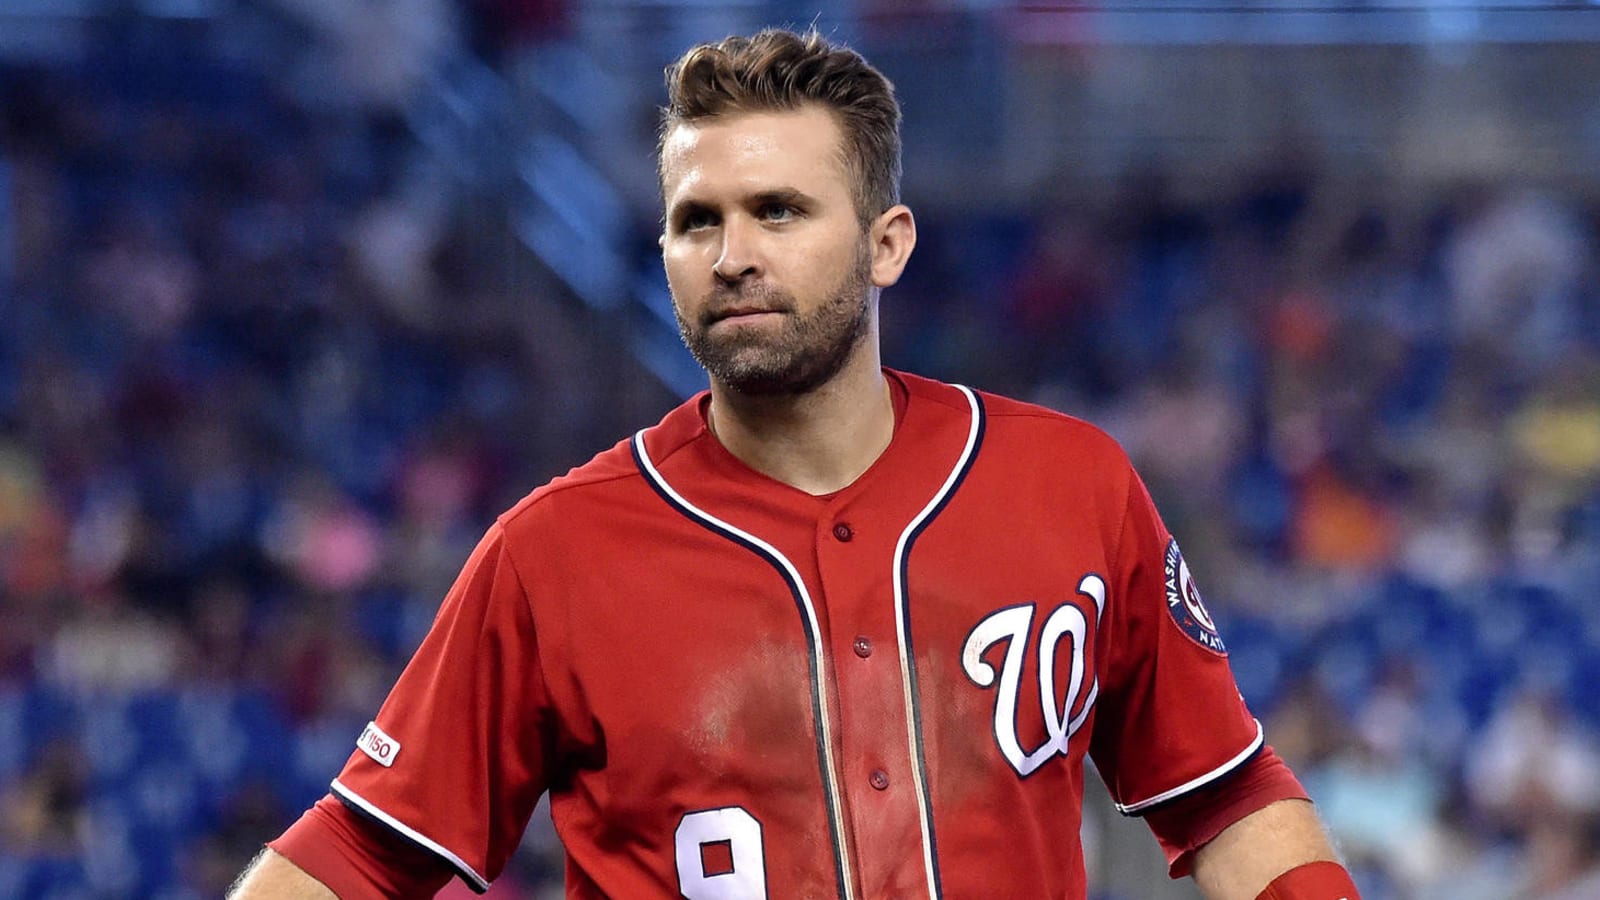 One-time All-Star Brian Dozier retires